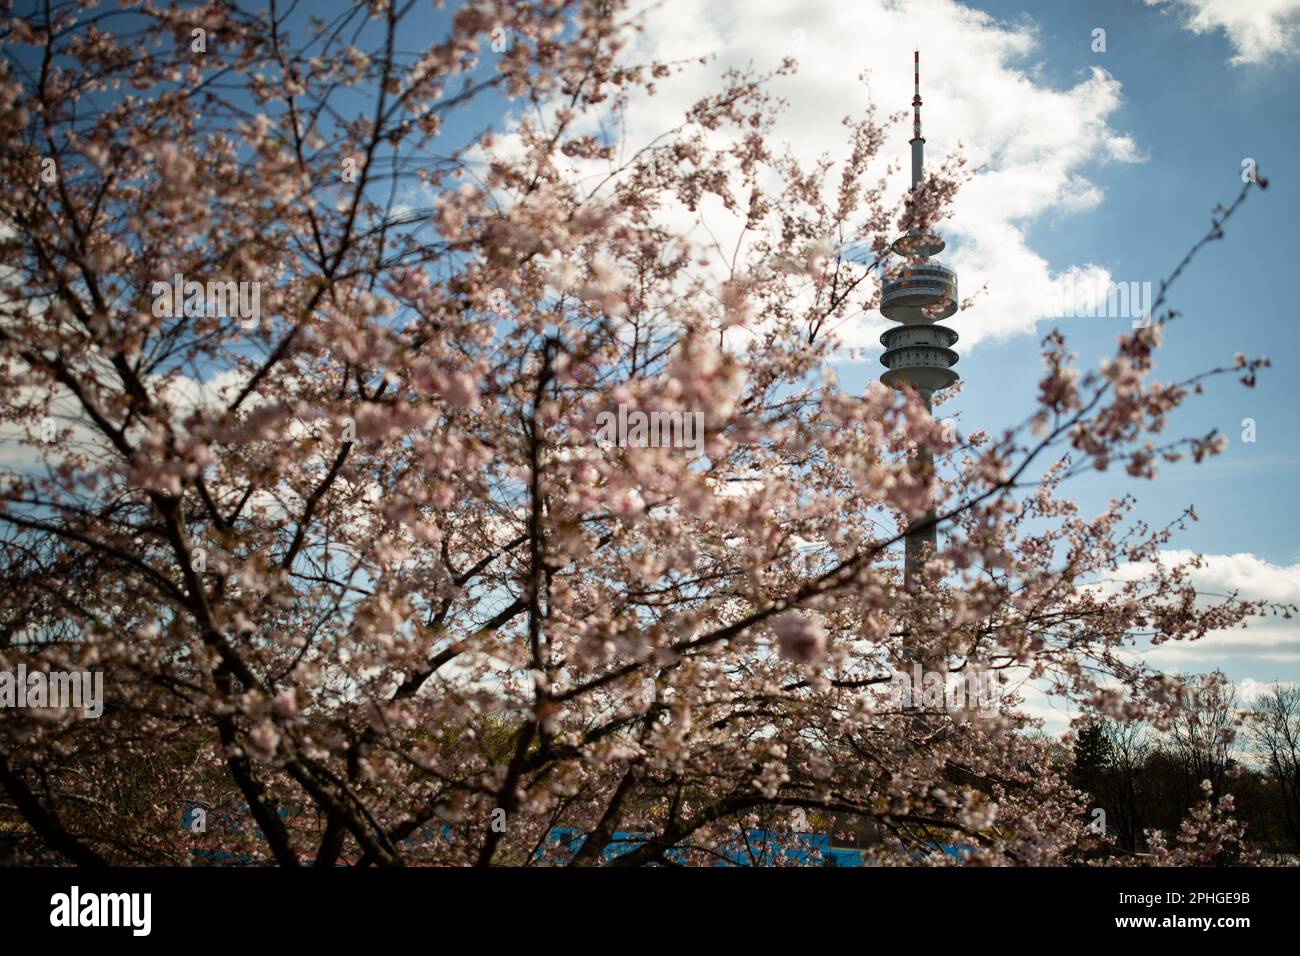 Munich, Germany. 28th Mar, 2023. Olympic park in Munich, Germany on March 28, 2023 at the cherry blossoms. In the japanese culture the time of the cherry blossom is a highlight of the calendar and the beginning of the spring. (Photo by Alexander Pohl/Sipa USA) Credit: Sipa USA/Alamy Live News Stock Photo